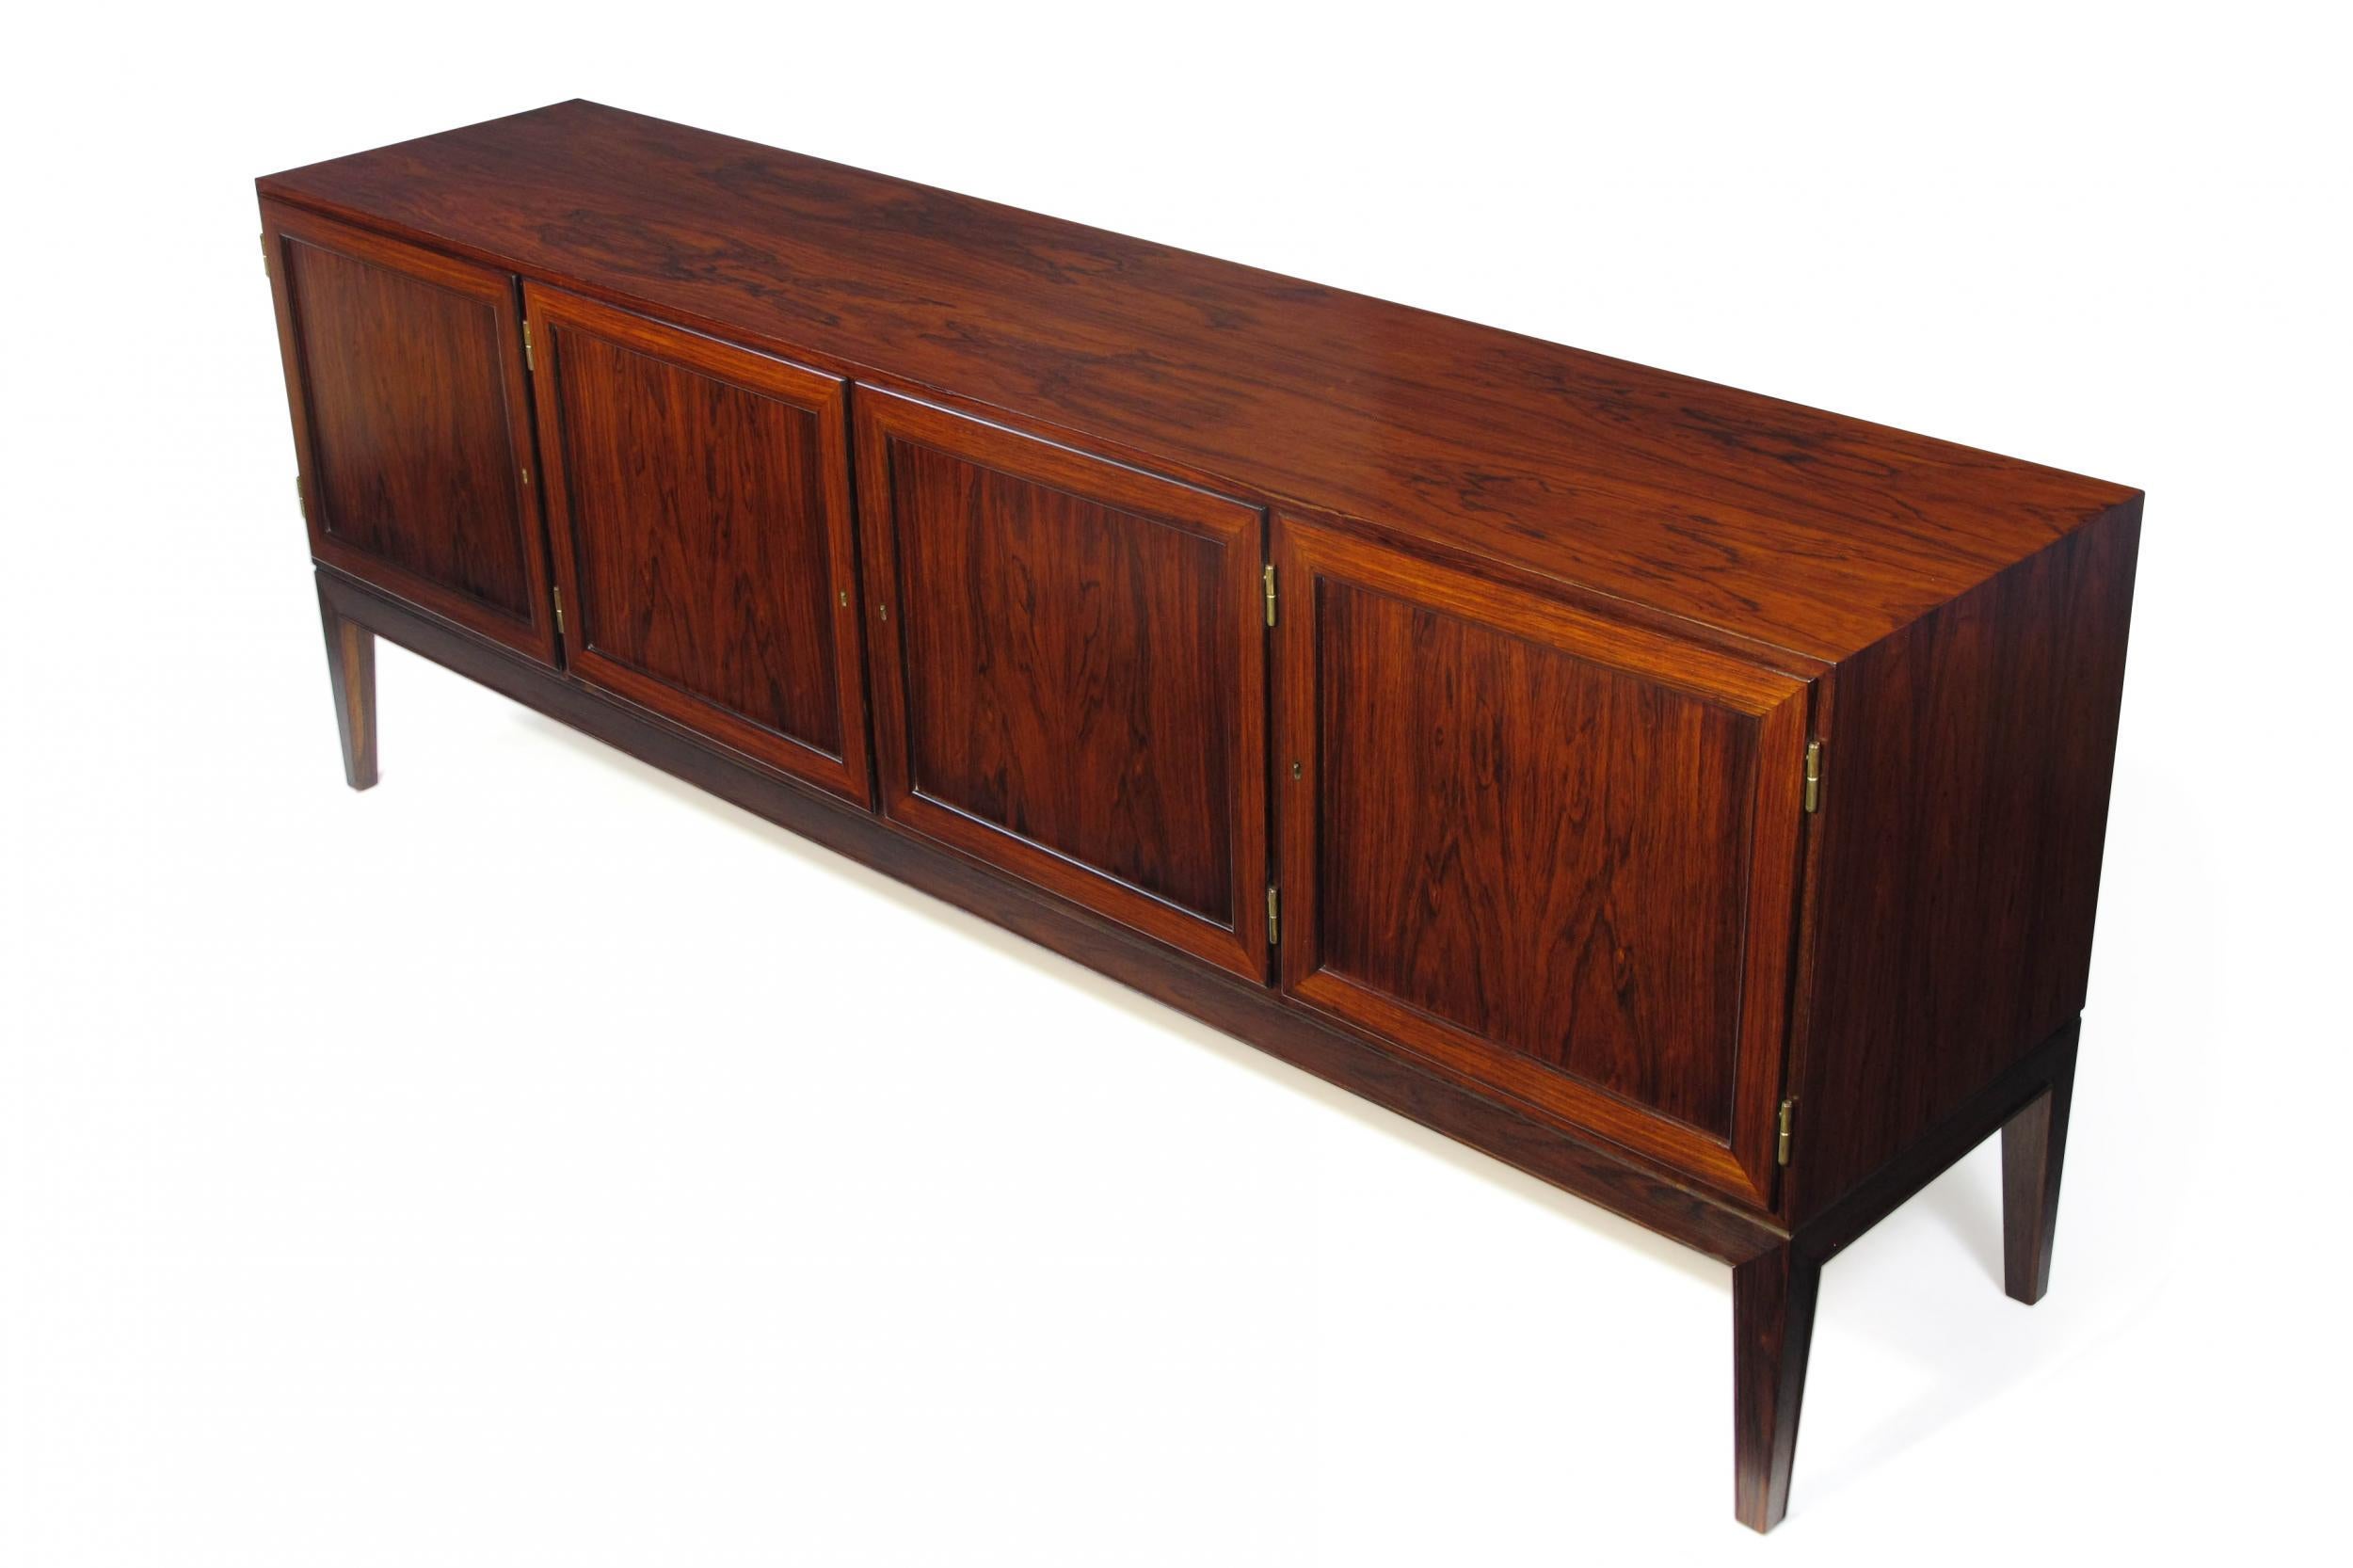 Finely crafted credenza of dark rosewood with pattern match across the front of doors attributed Ole Wanscher. Fully locking doors open to reveal a mahogany interior with an adjustable shelf and series of silverware drawers on the left side. Raised